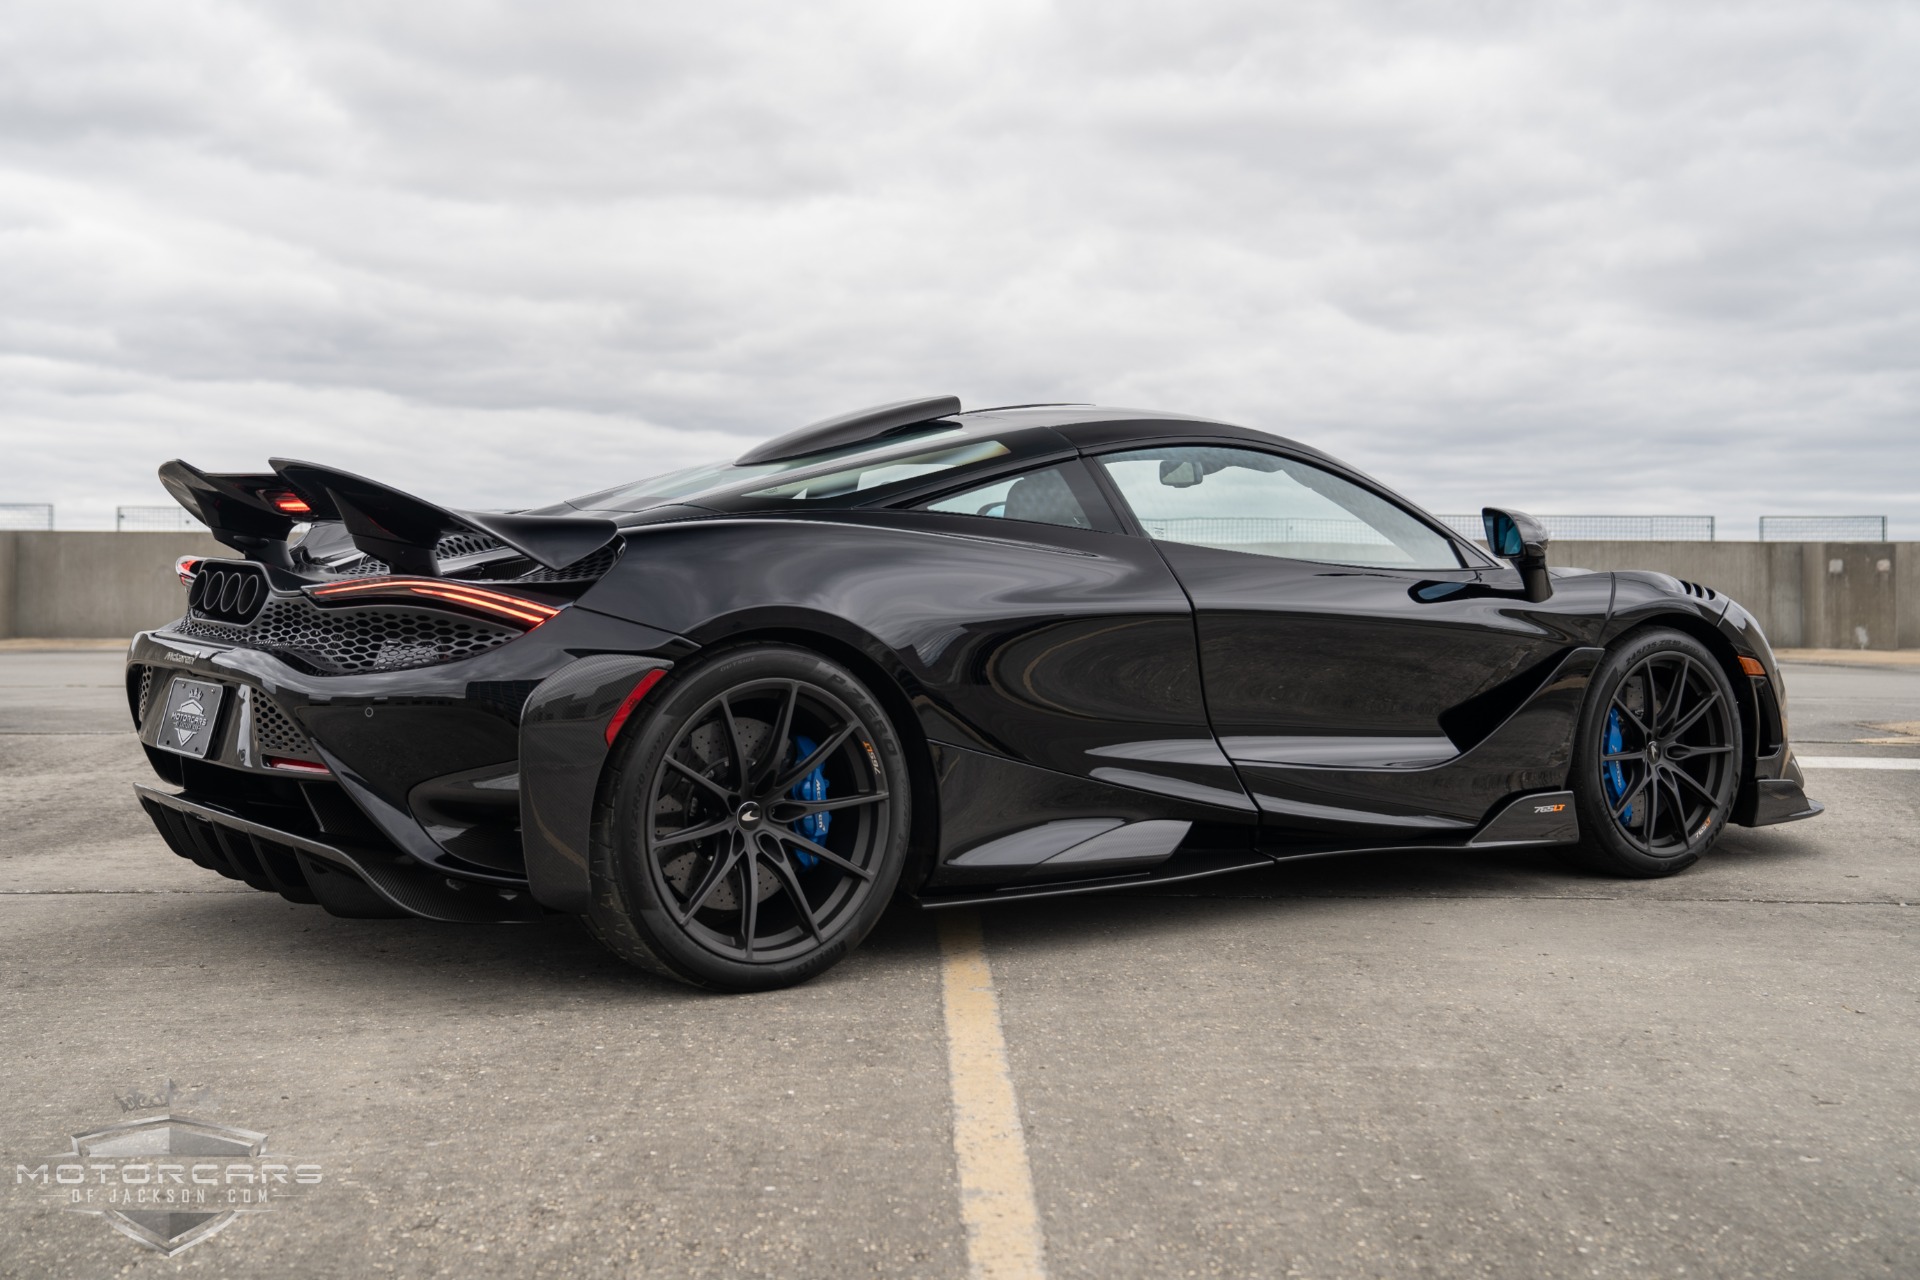 2021 McLaren 765LT Coupe Stock MW765597 for sale near